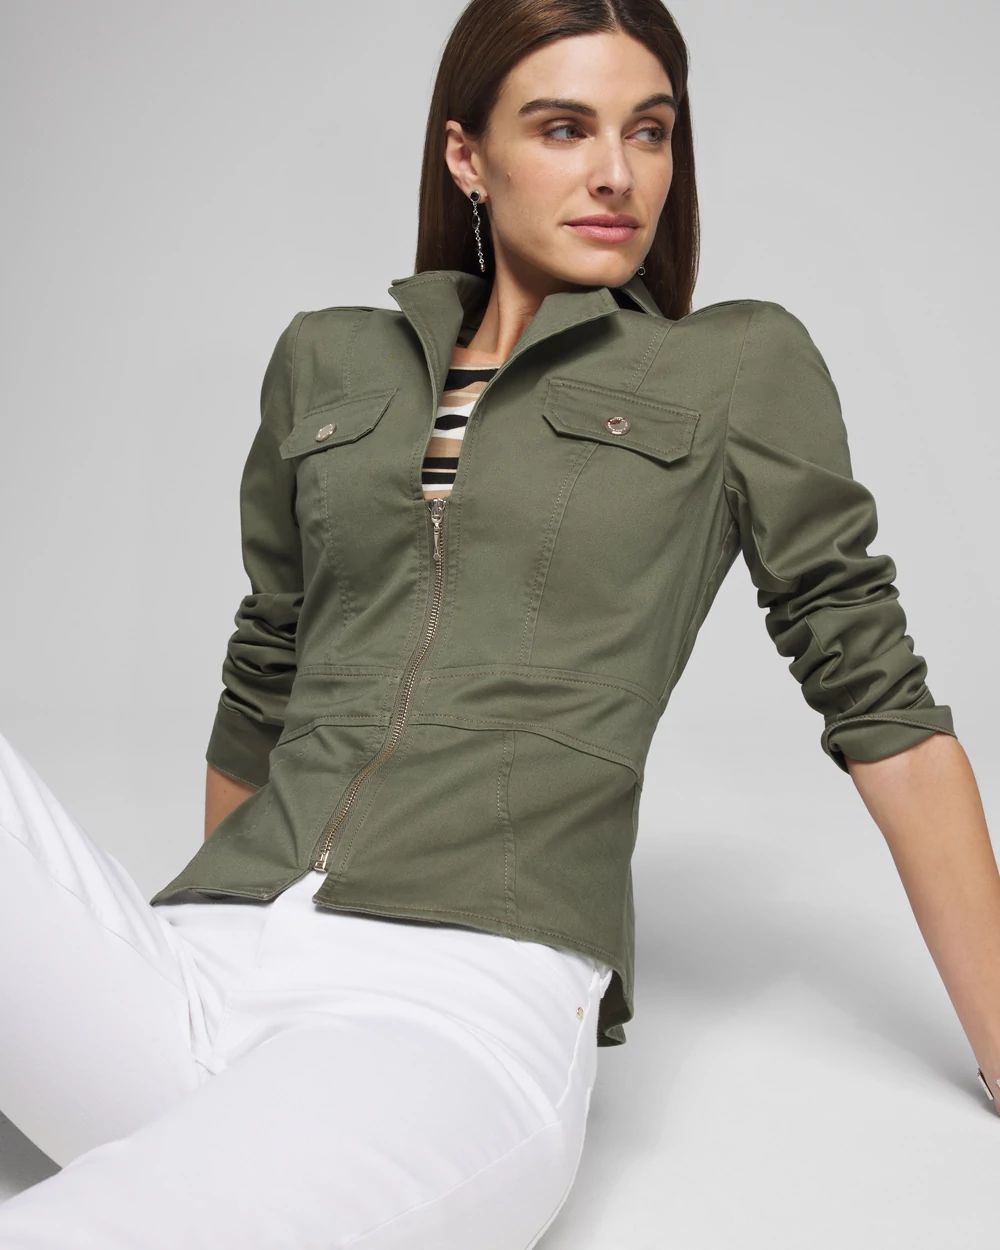 Outlet WHBM Stretch Sateen Jacket click to view larger image.